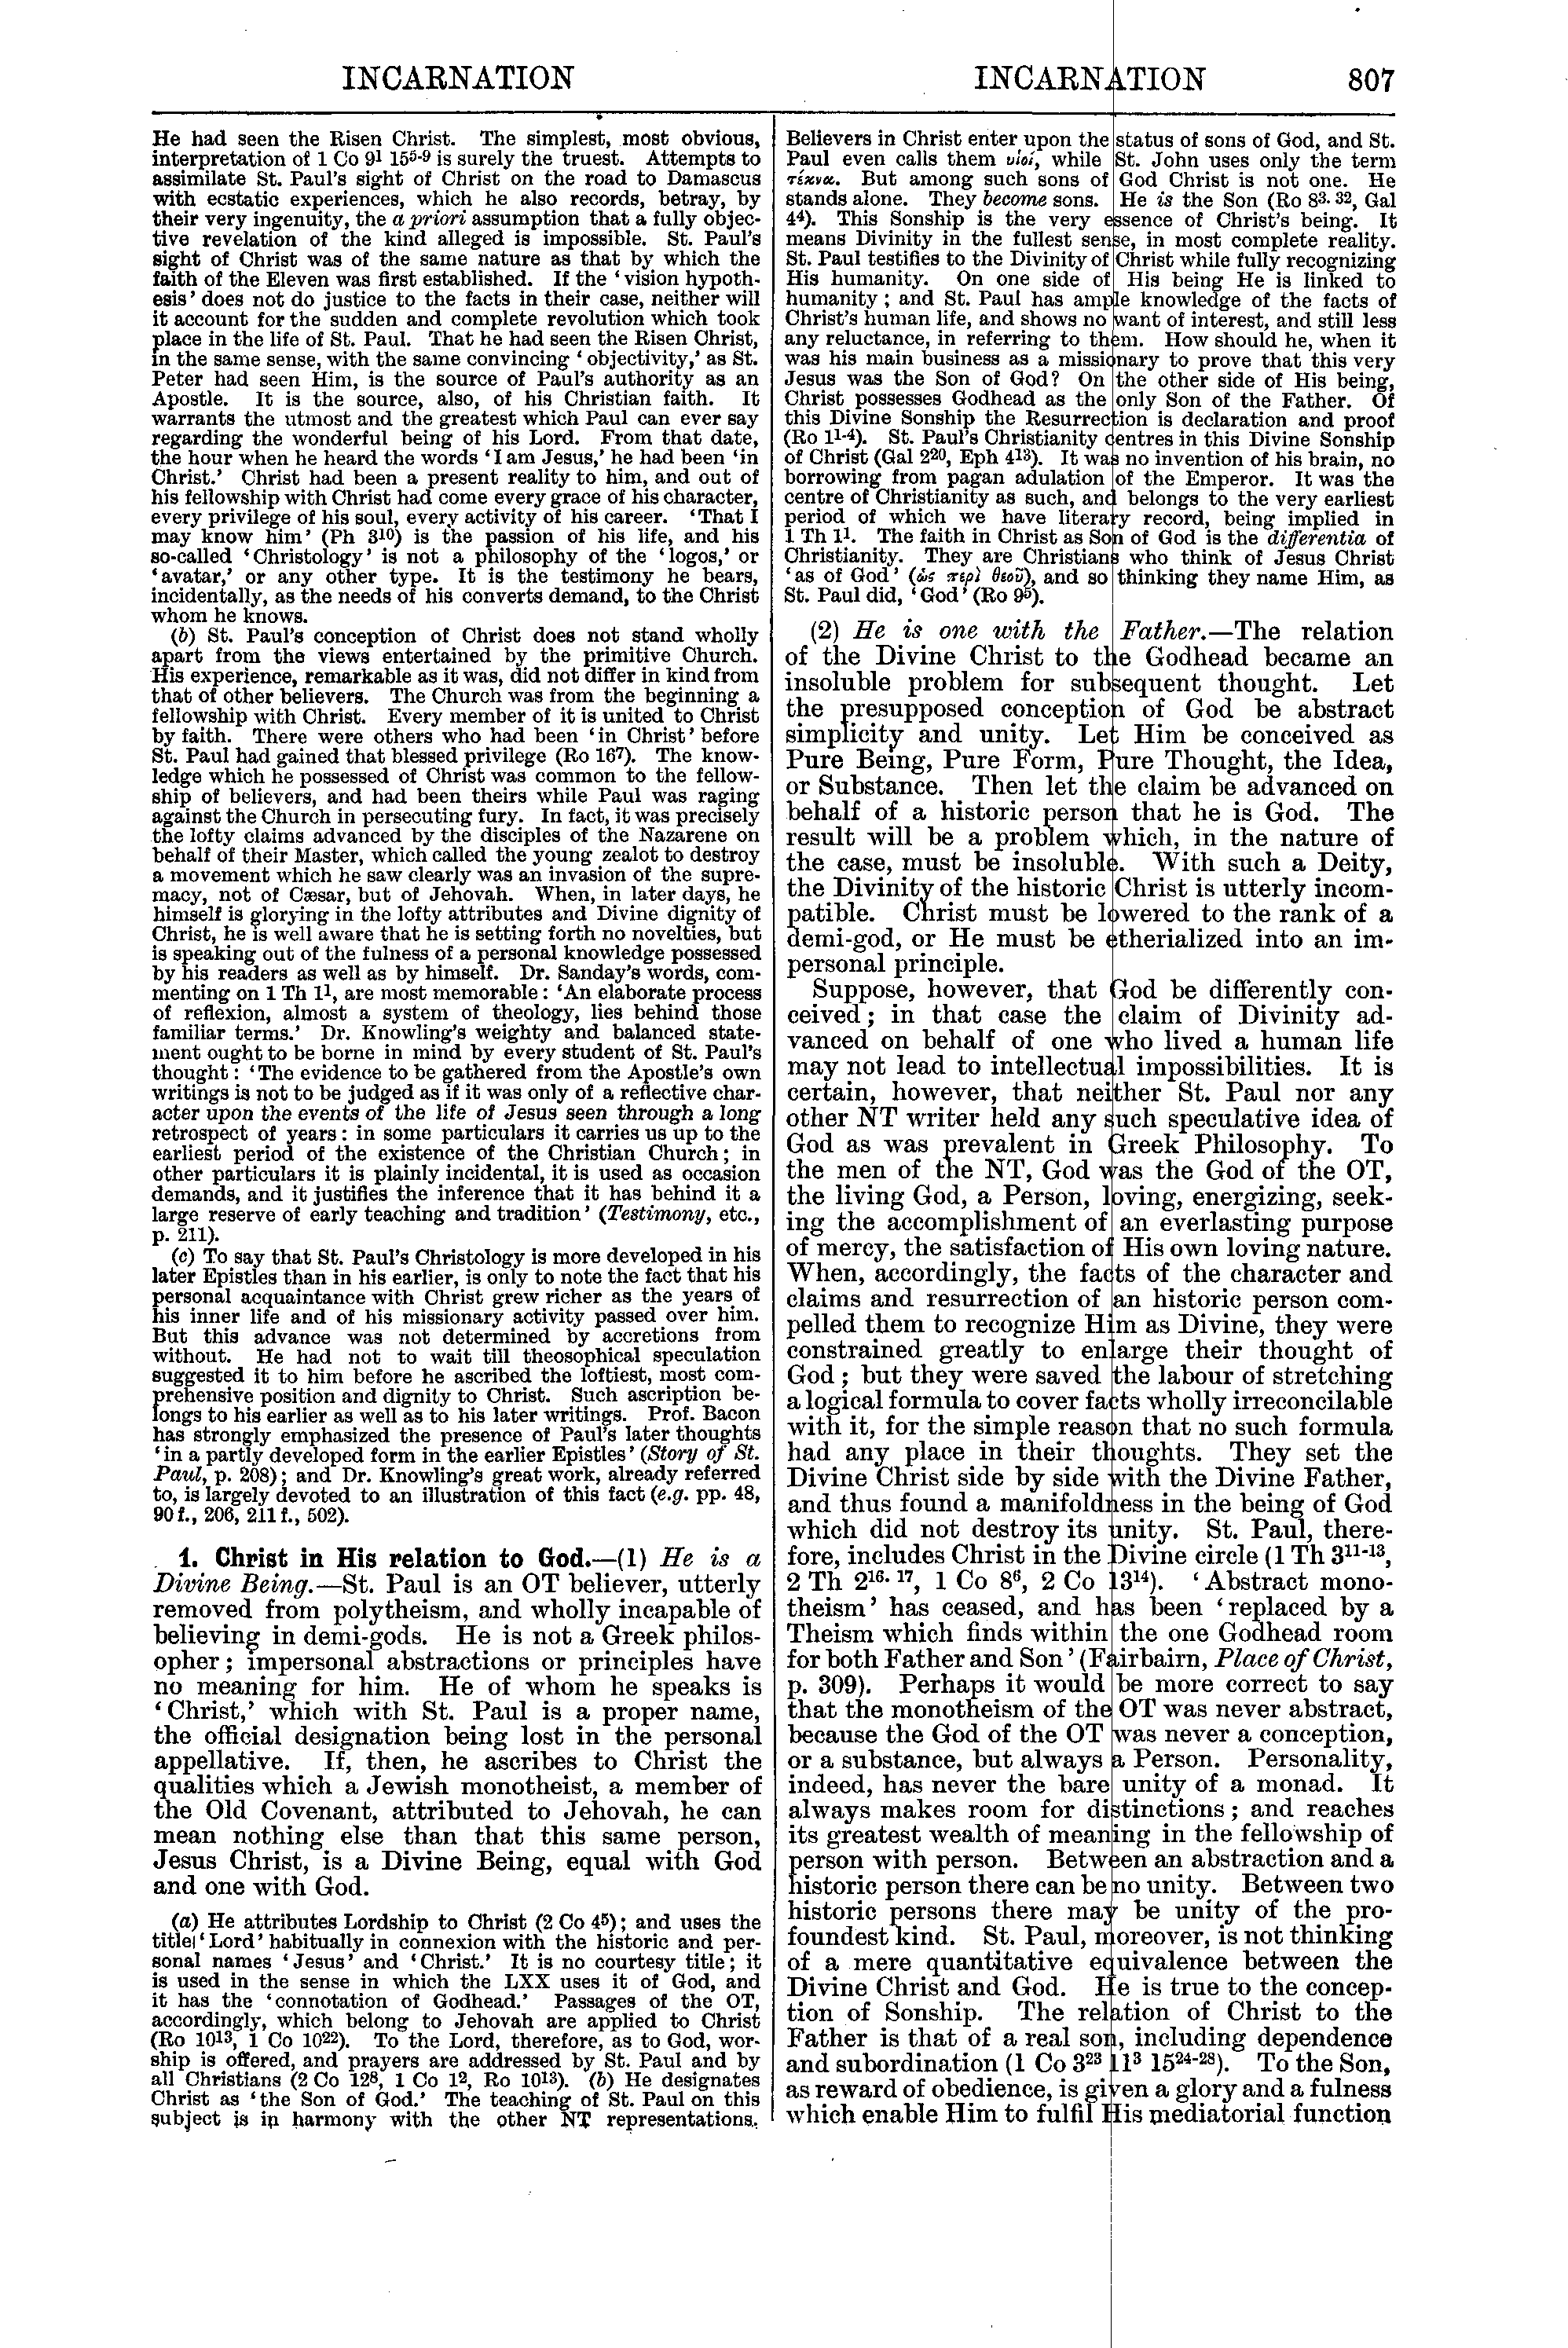 Image of page 807